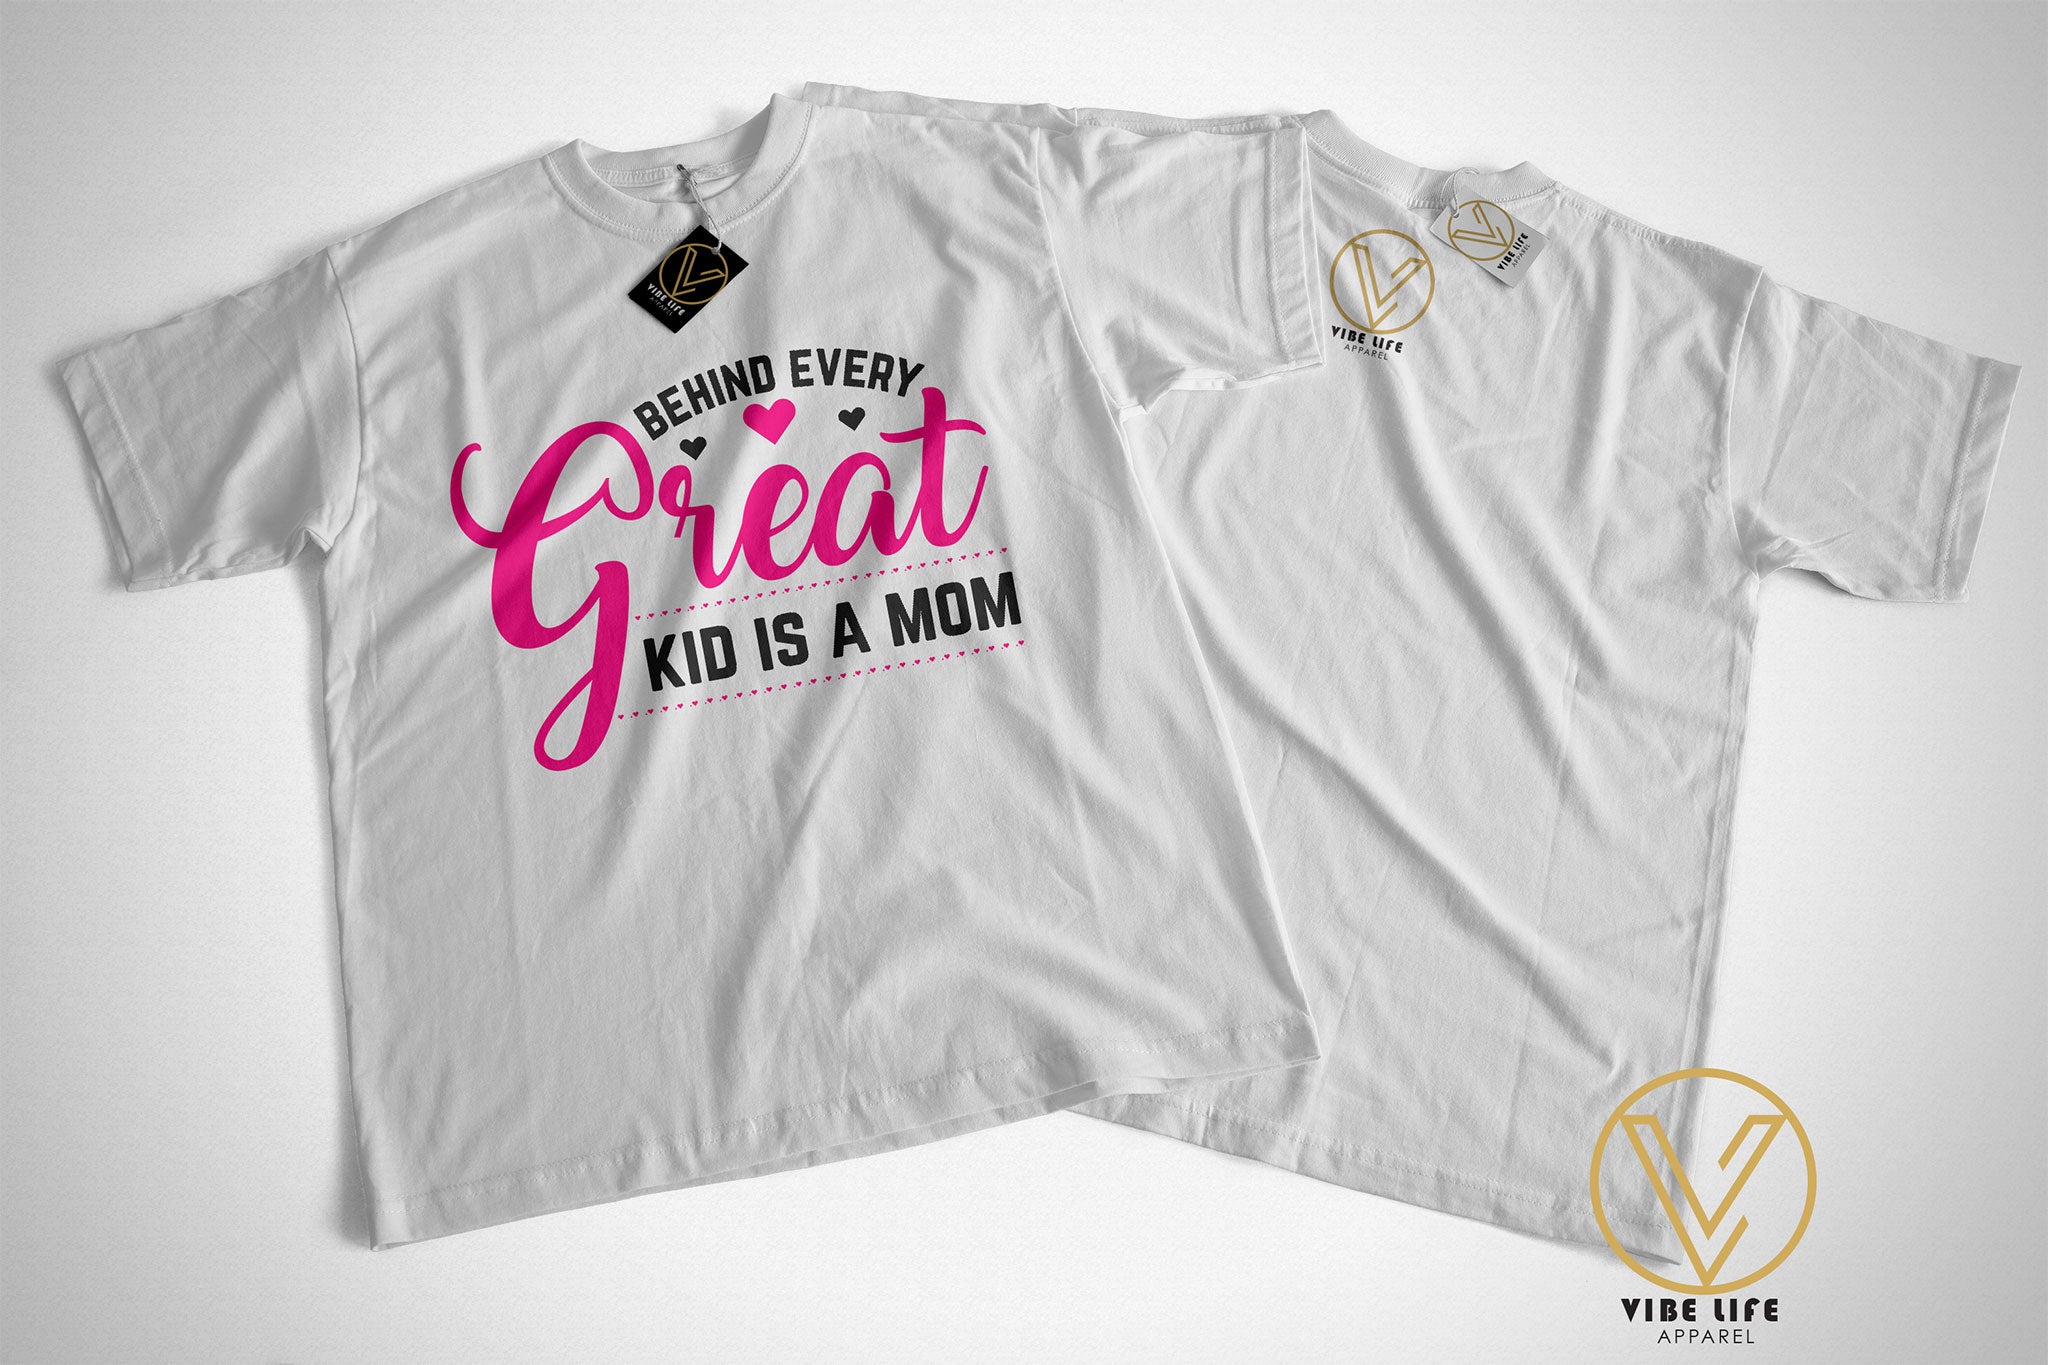 Behind Every Great Kid is a MOM - Unisex Softstyle Crewneck Tee